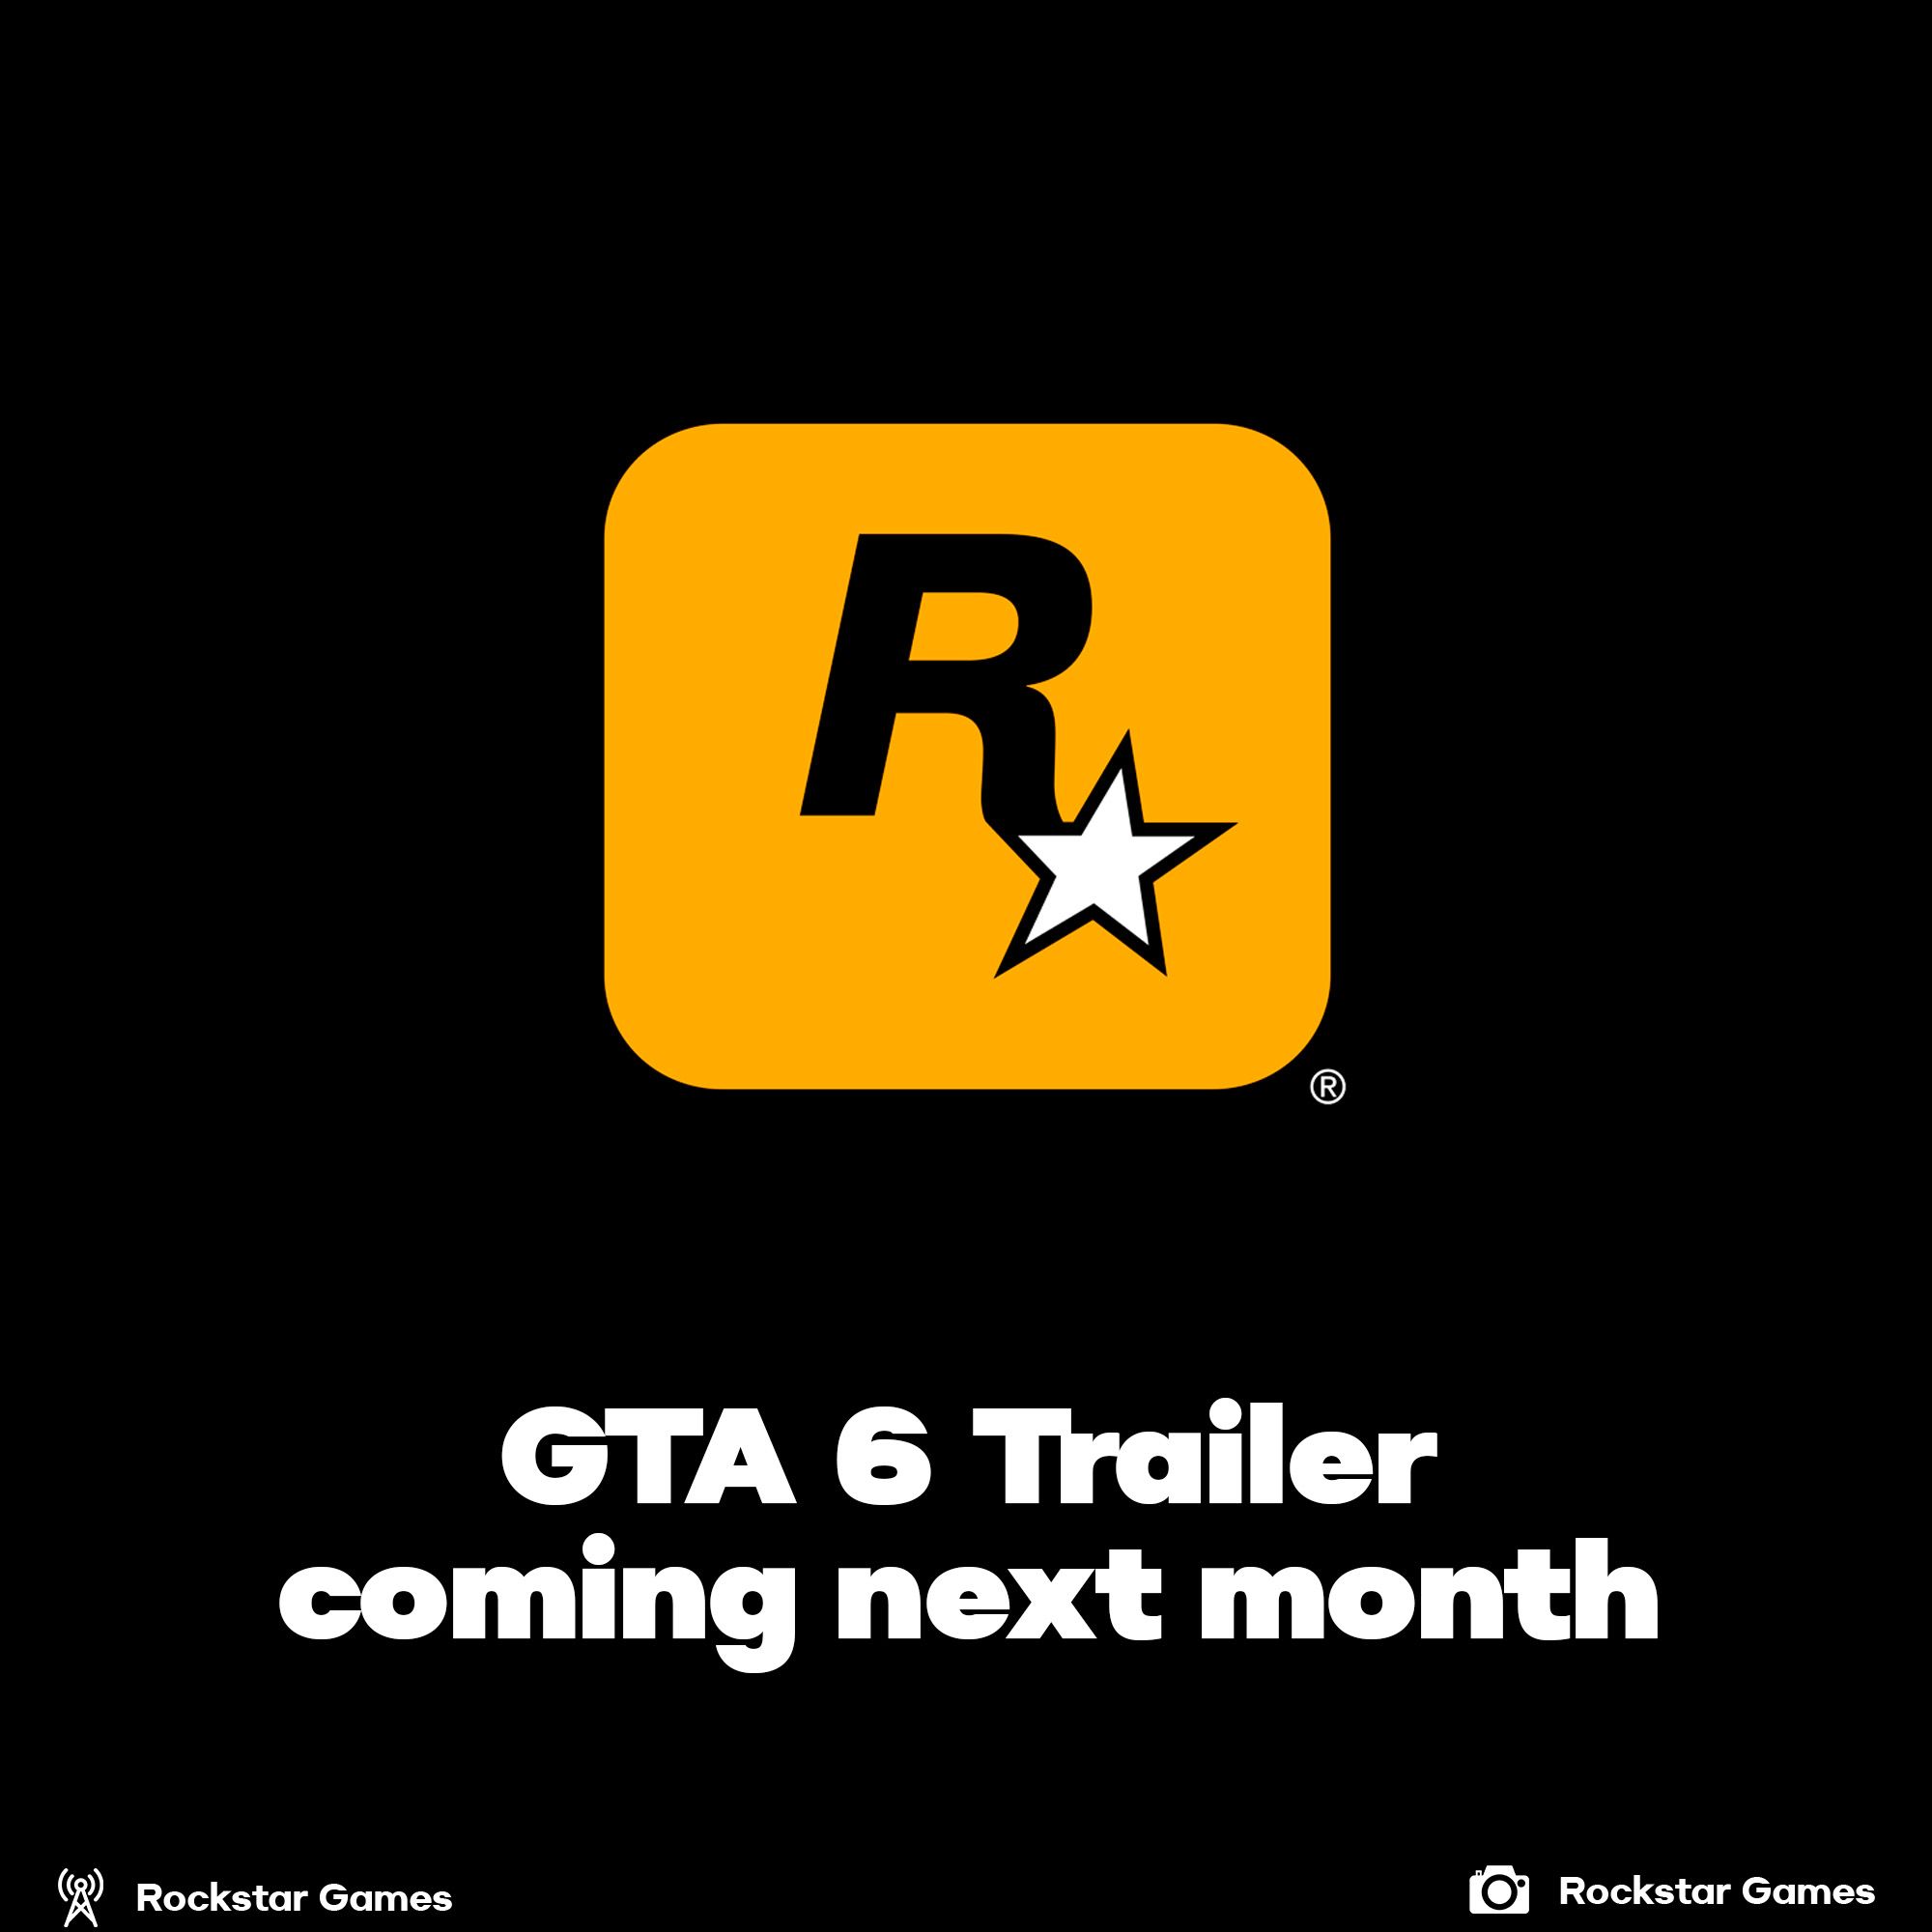 GTA 6 trailer coming next month